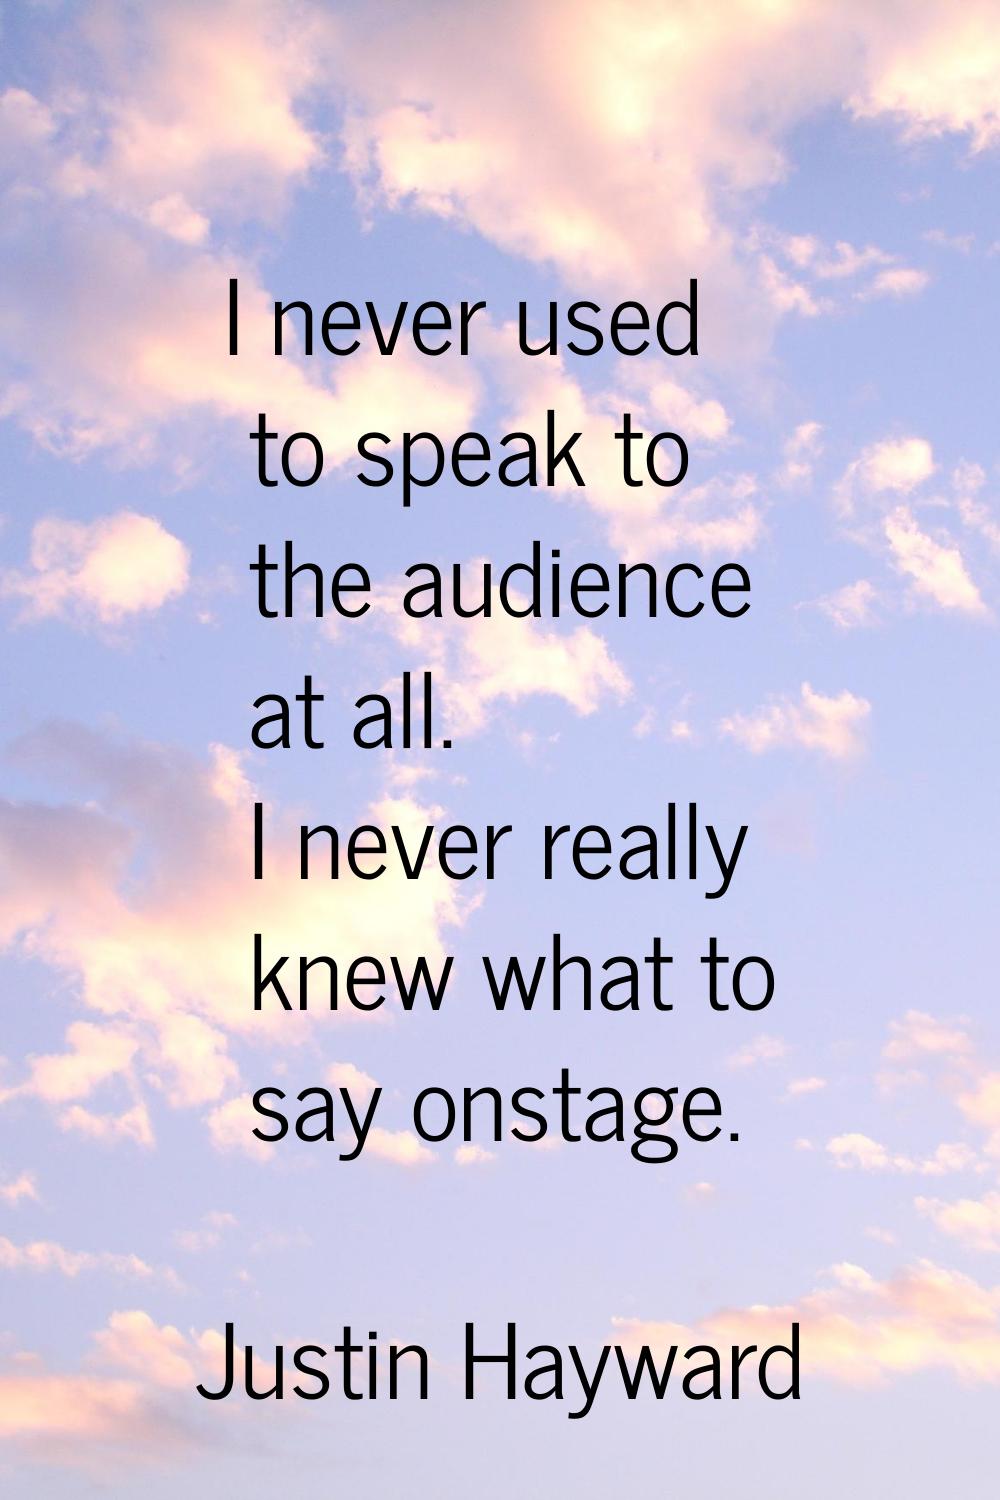 I never used to speak to the audience at all. I never really knew what to say onstage.